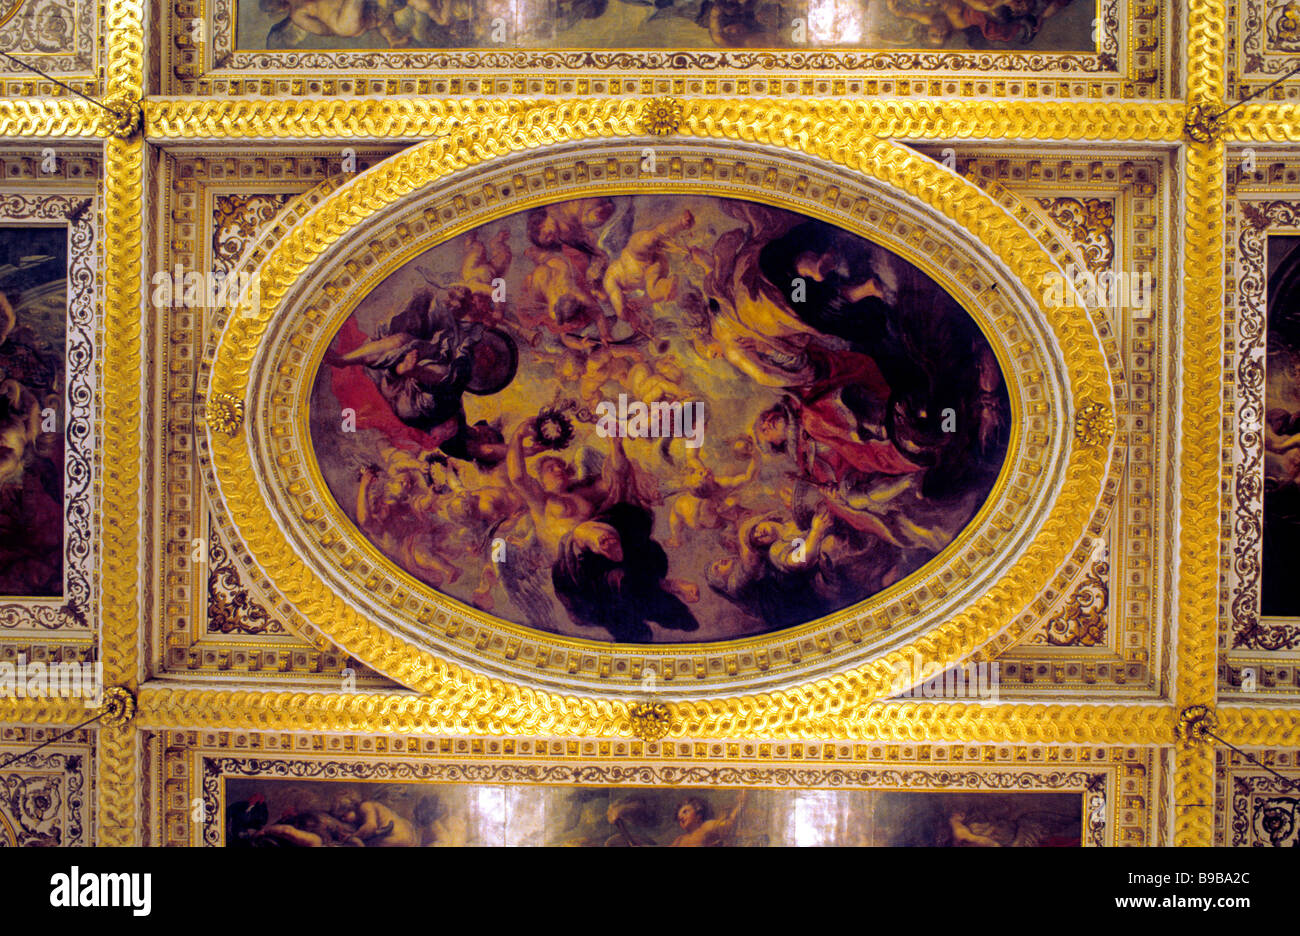 Banquetting House Rubens painted ceiling detail Whitehall London England UK 17th century painting gilt gilded Stock Photo